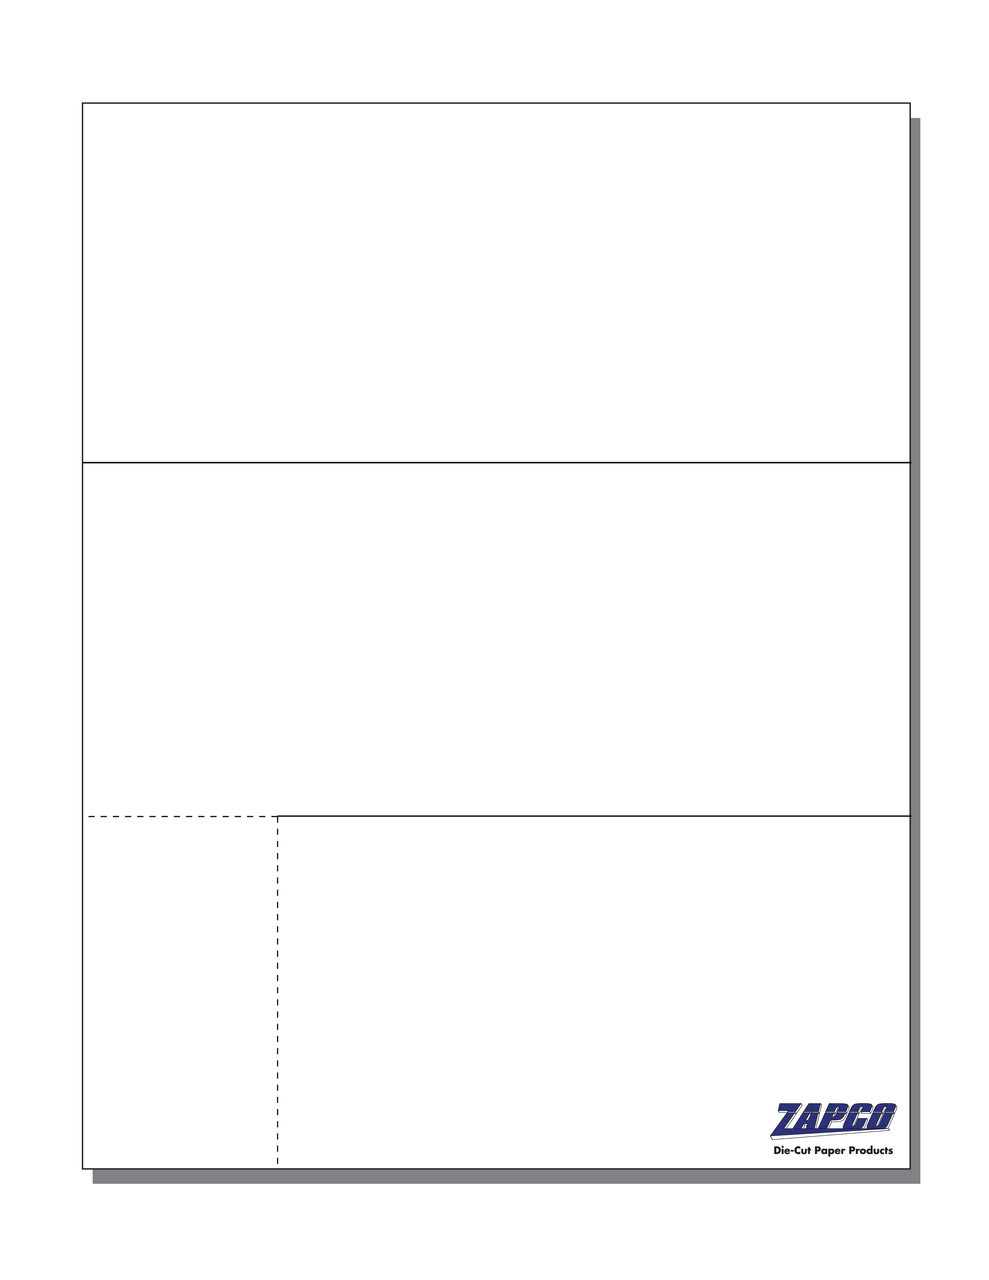 Item 98: 1-Up 3 2/3" x 8 1/2" Tri-Fold Mailer with Business Card 8 1/2" x 11" Sheet(250 Sheets)